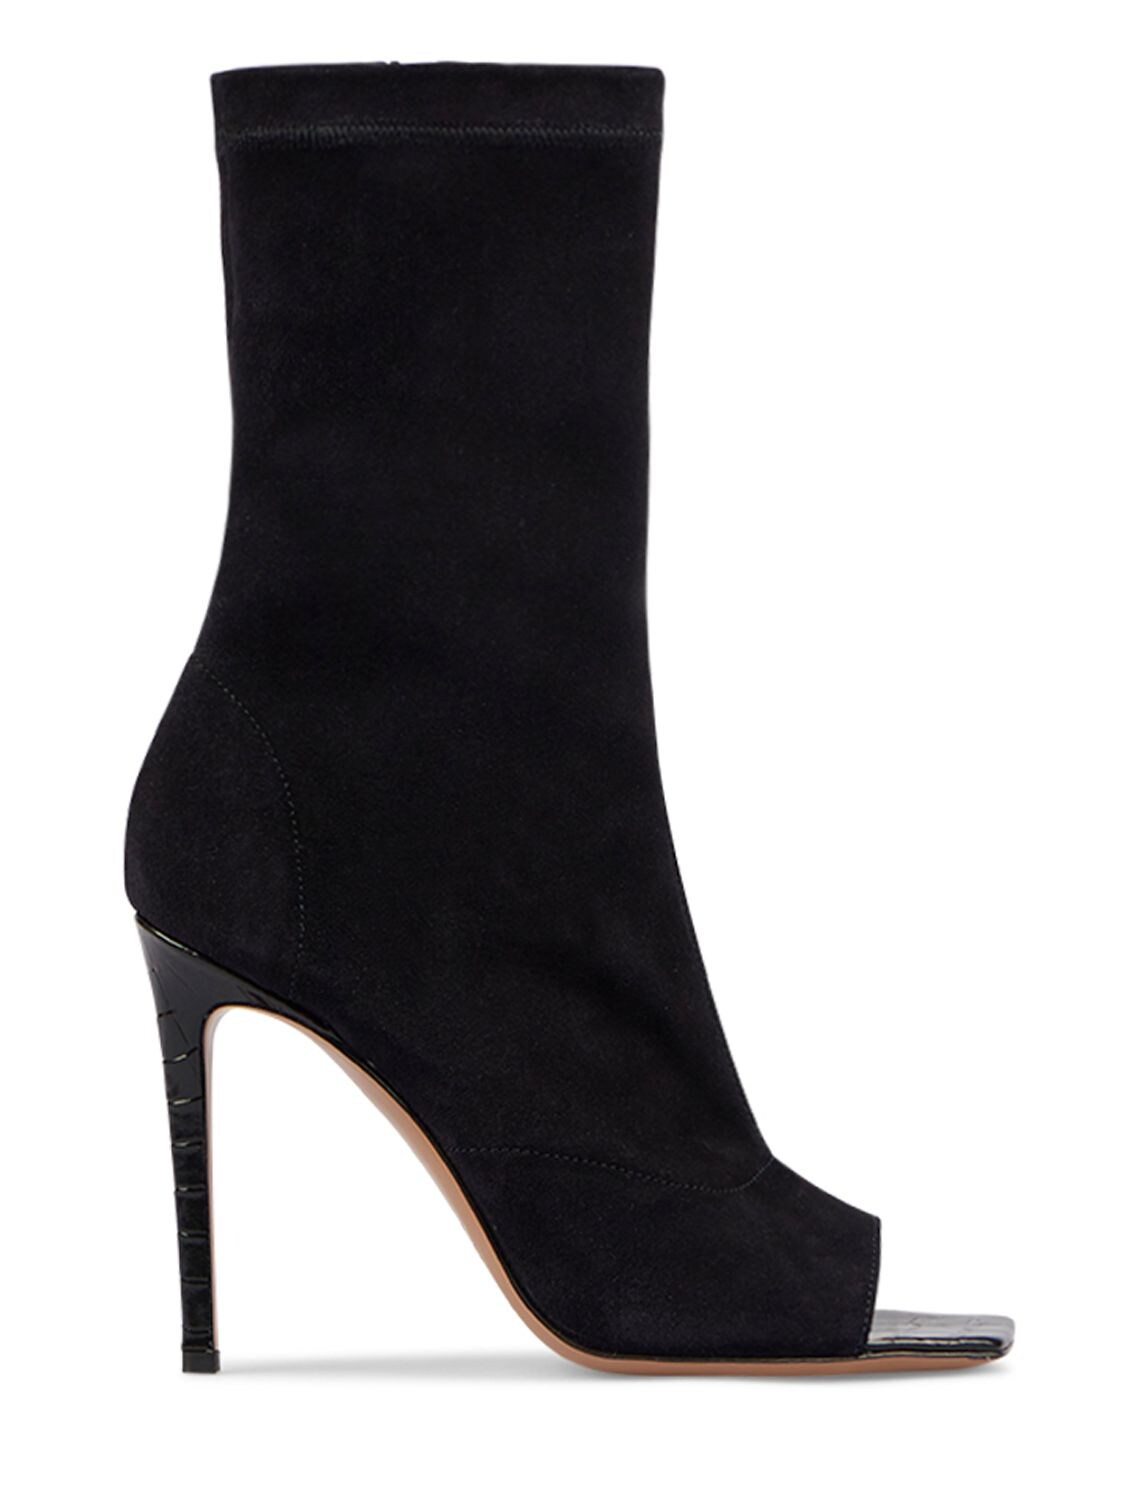 Image of 105mm Amanda Suede Ankle Boots